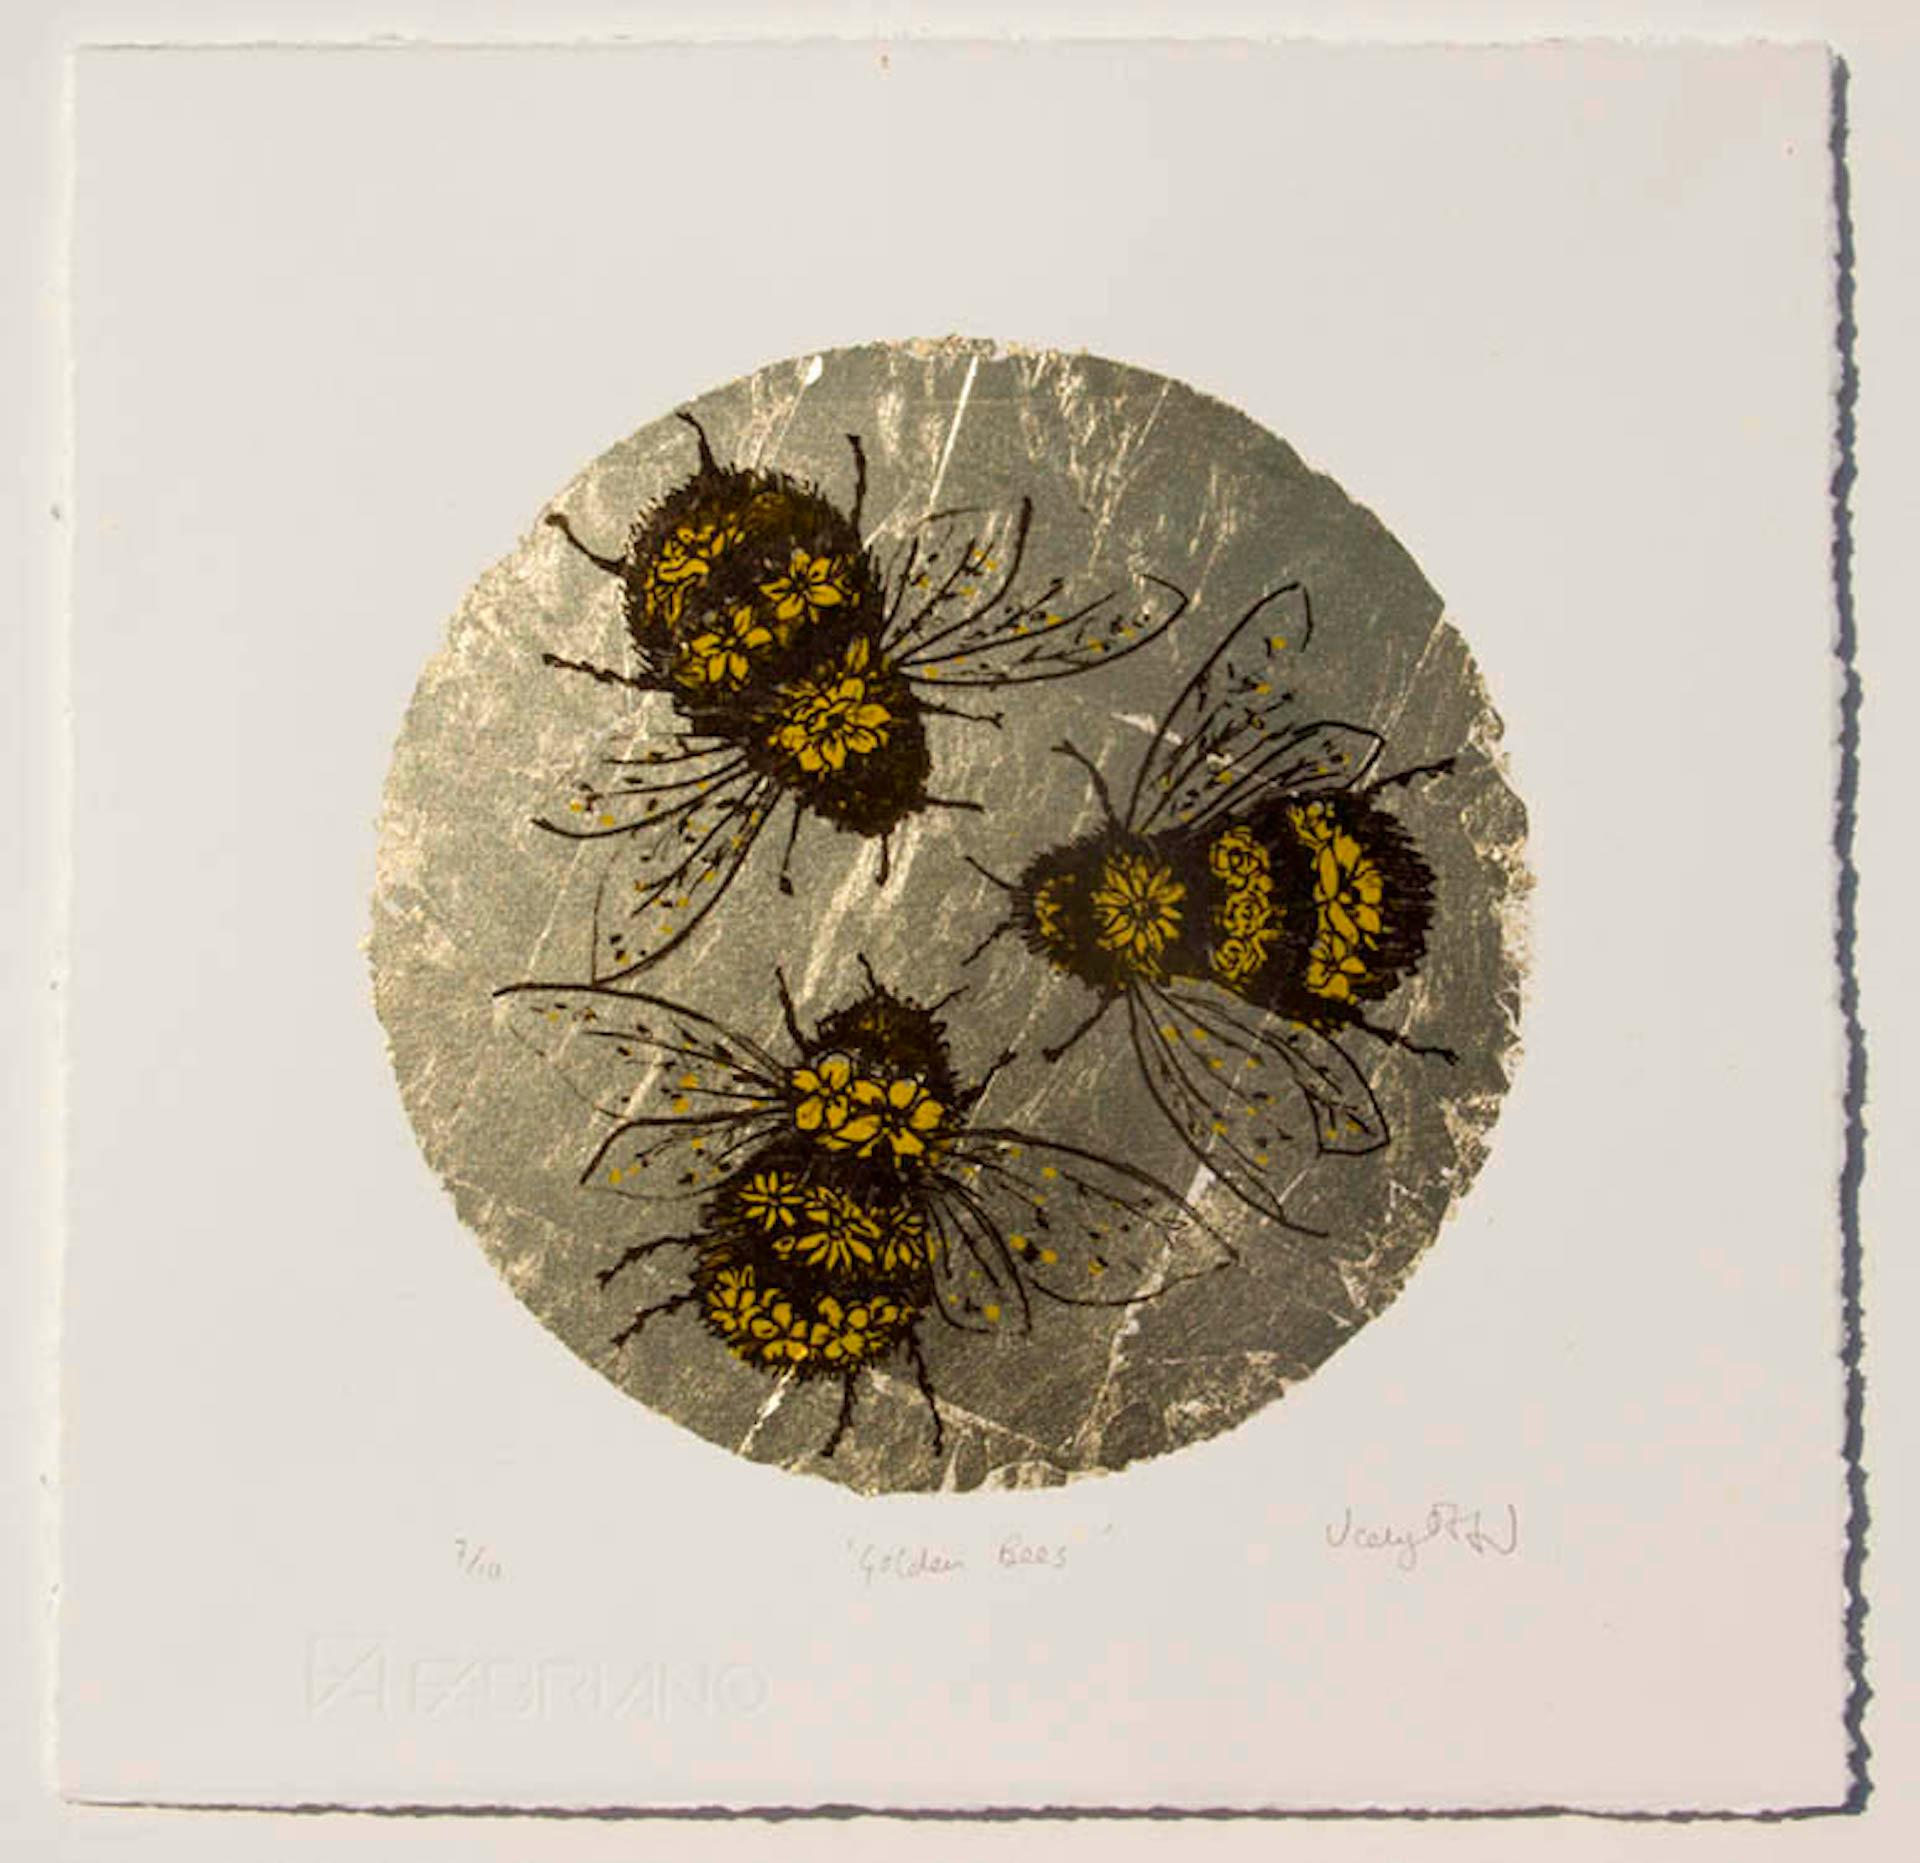 Vicky Oldfield
Golden Bee
Limited Edition Silkscreen Print with gold leaf
Edition of 10
Image Size: H 35cm x W 35cm
Sold Unframed
Please note that in situ images are purely an indication of how a piece may look

Golden Bees is a Limited edition